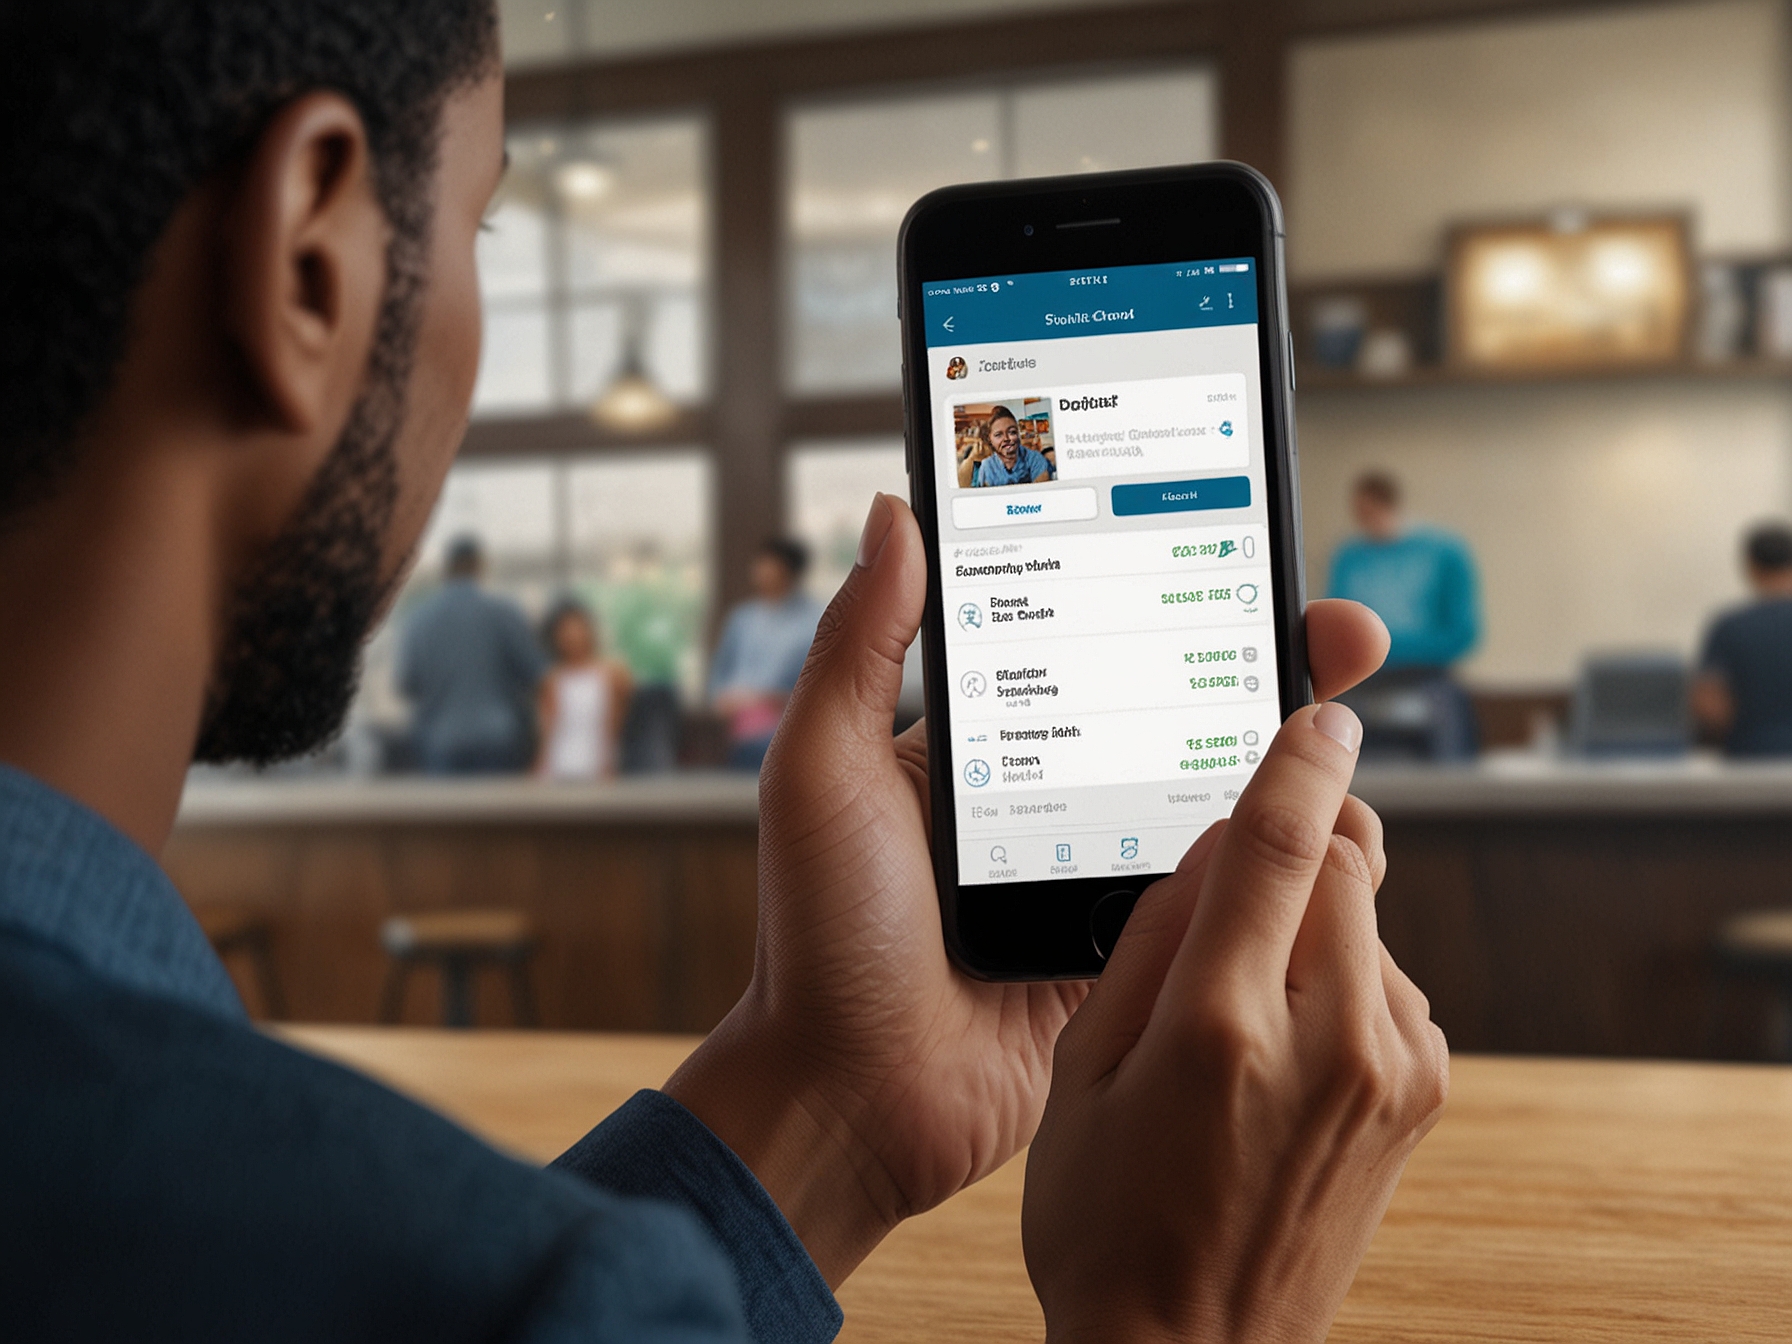 An illustration showcasing SouthState Bank's new user-friendly mobile banking app, highlighting features like mobile check deposits, account transfers, and real-time account alerts for customers.